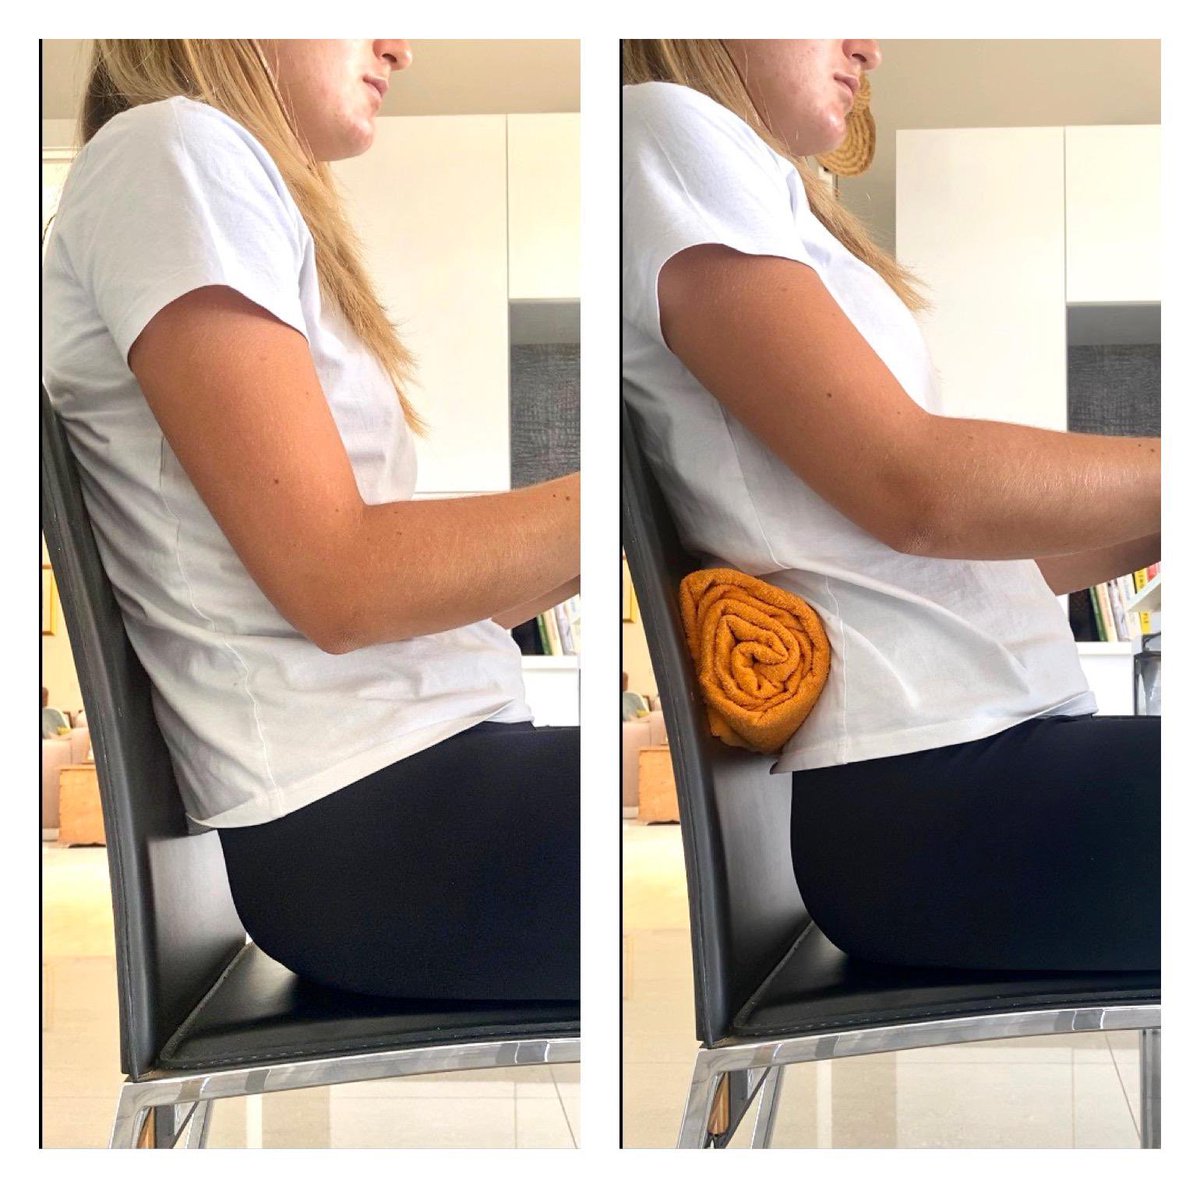 Function360 on X: By placing a towel behind your lower back, you are  restoring the lower back curve, which results in sitting more upright and  your shoulders aren't rolled forward. This can